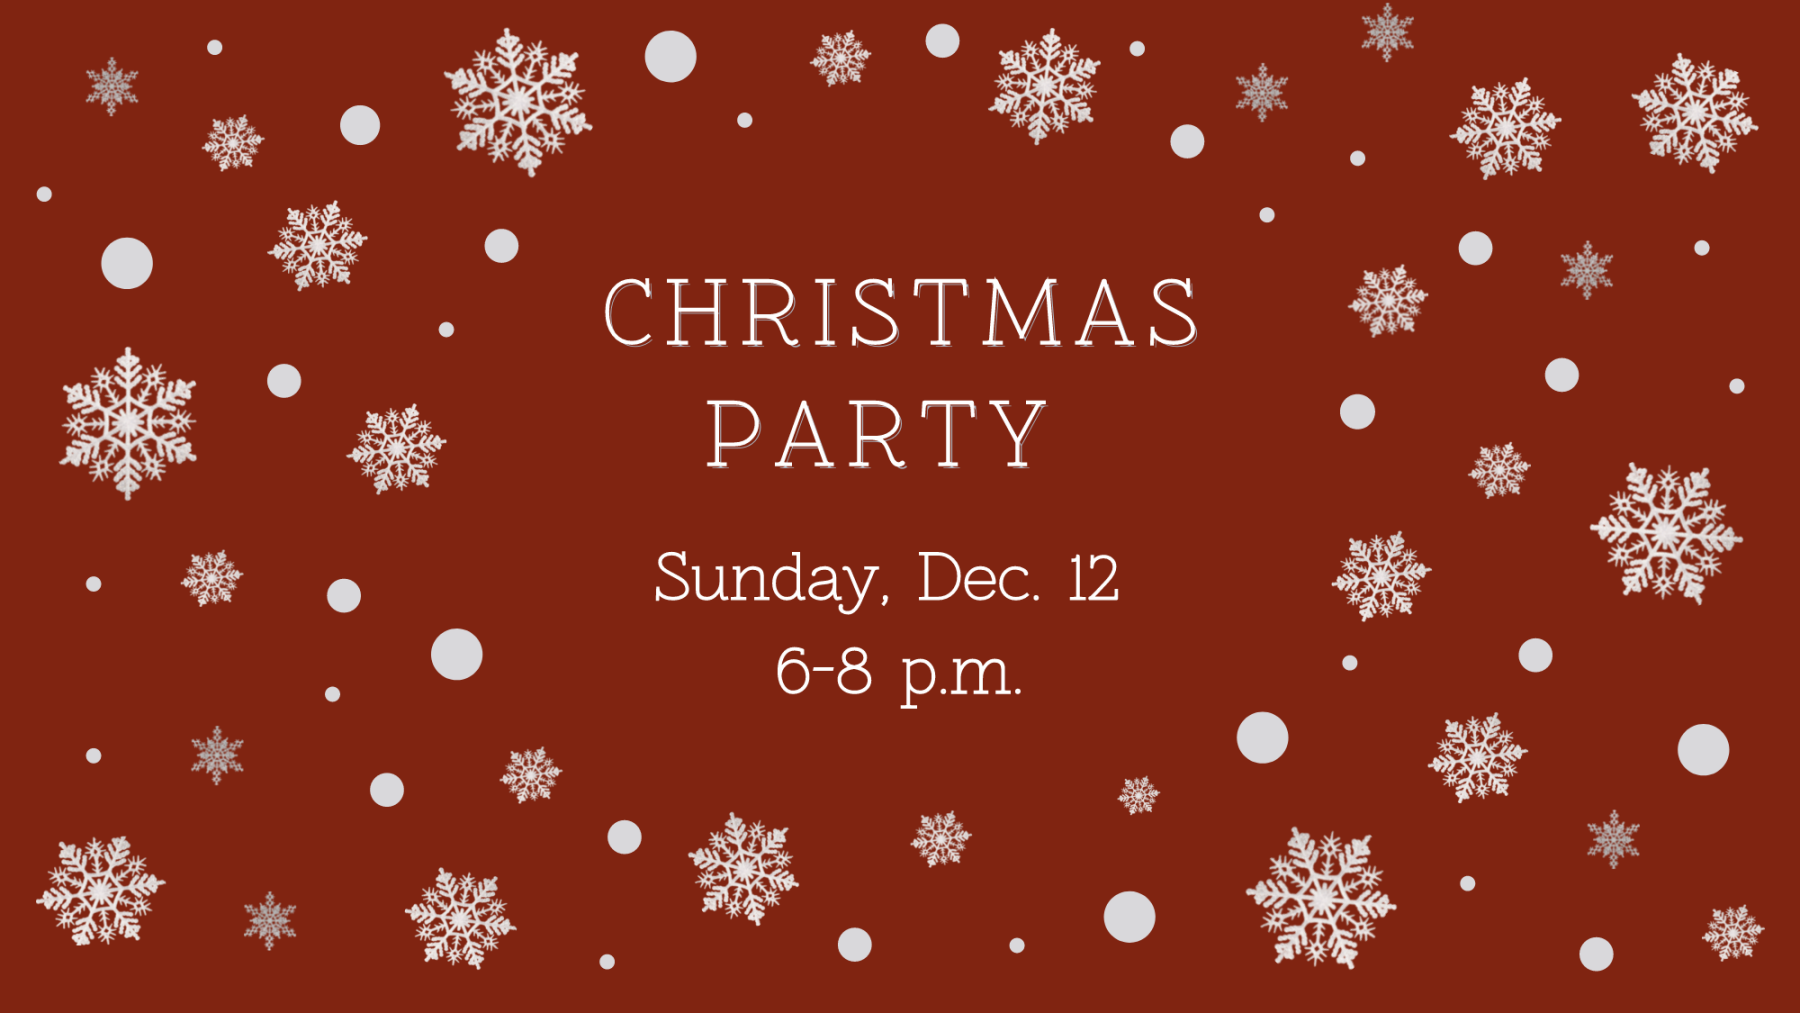 Youth Group Christmas Party